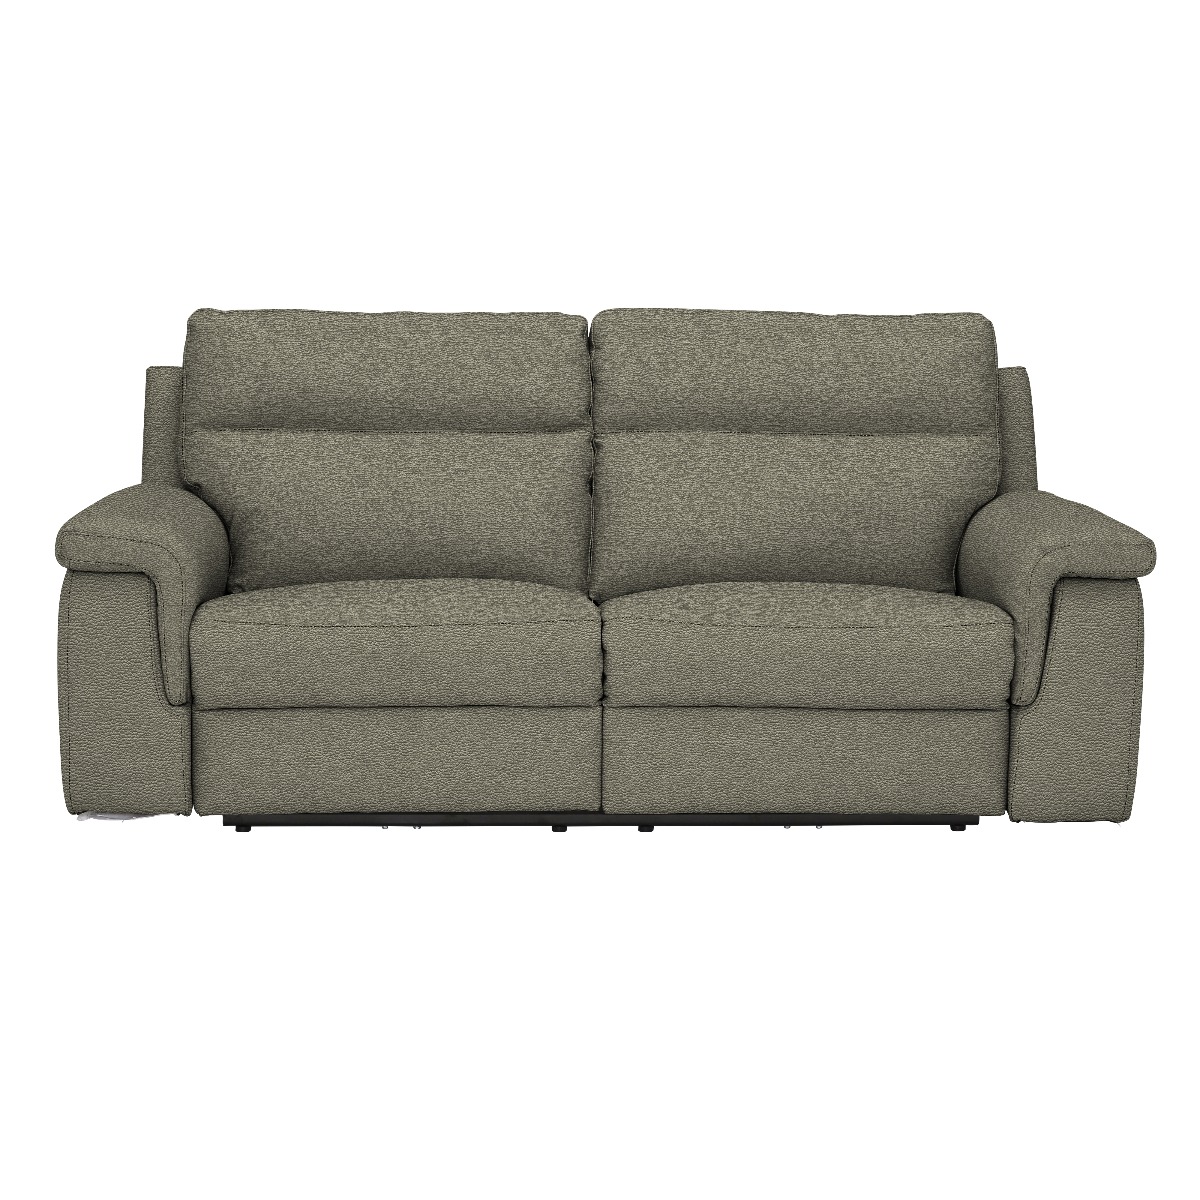 Fulton 3 Seater Sofa With 2 Electric Recliners, Neutral | Barker & Stonehouse